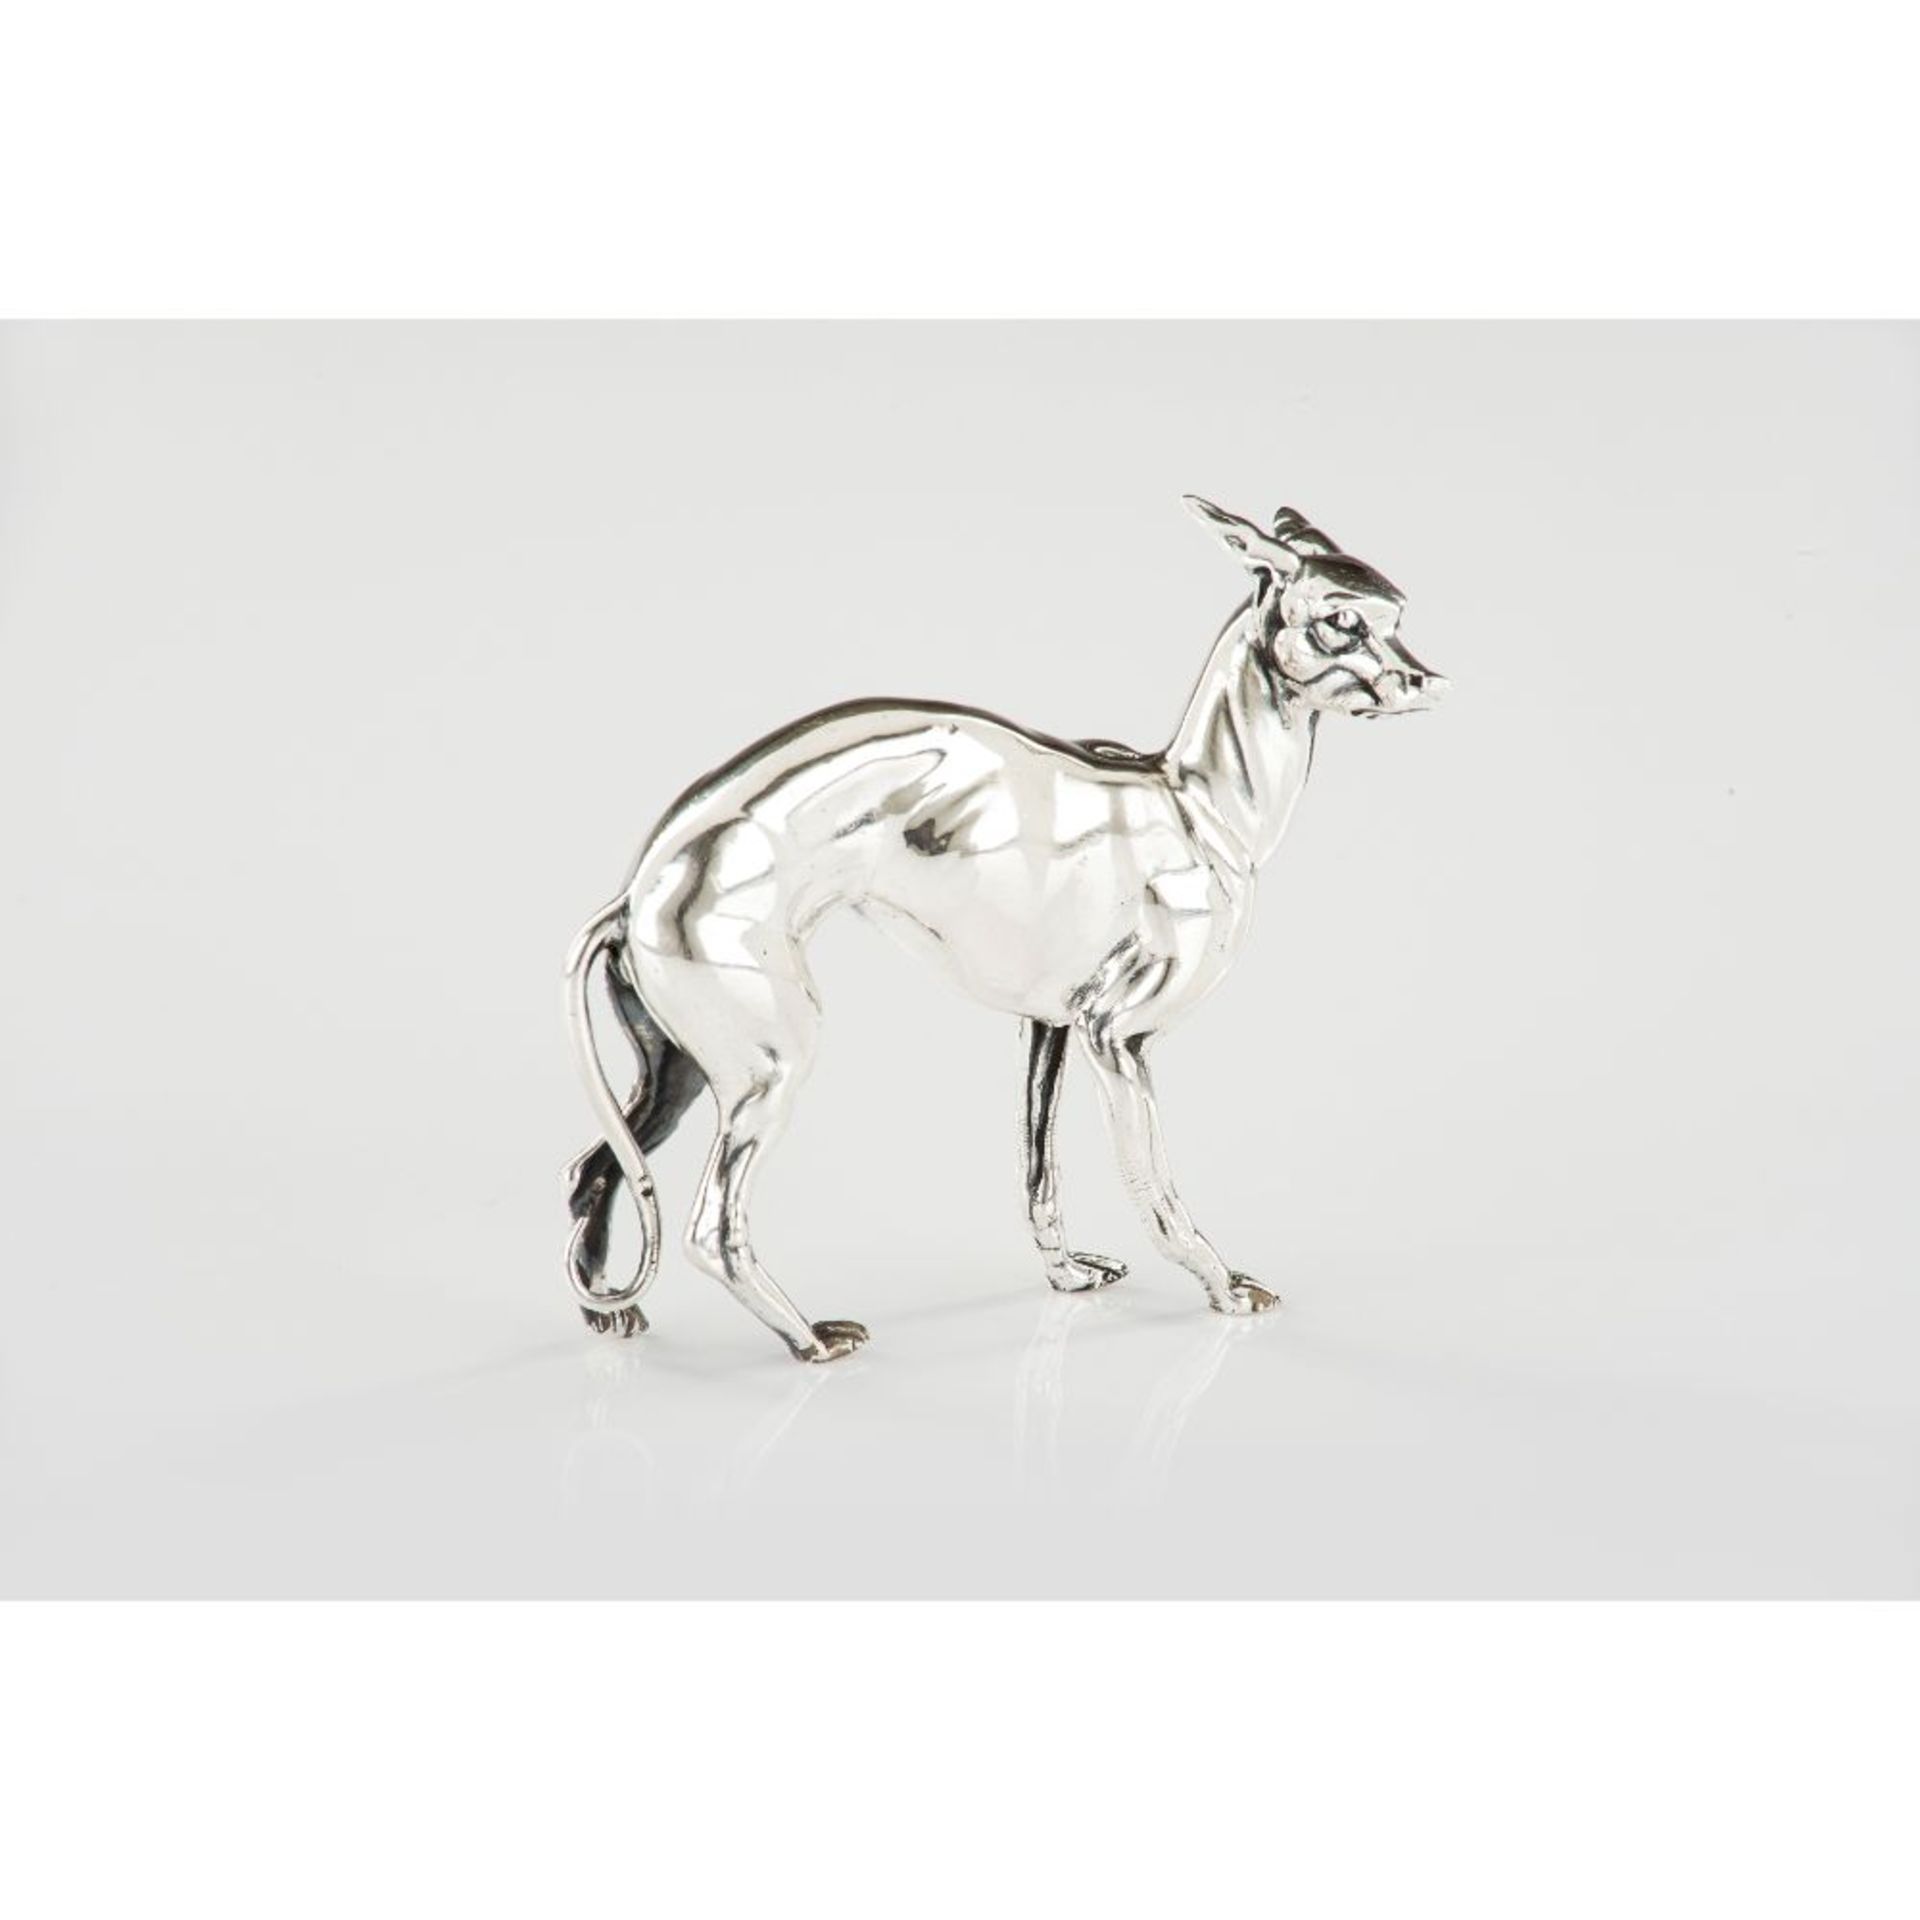 A dog, Silver sculpture, 19th century, Unmarked, Lisbon recognition mark only (1887), (signs of